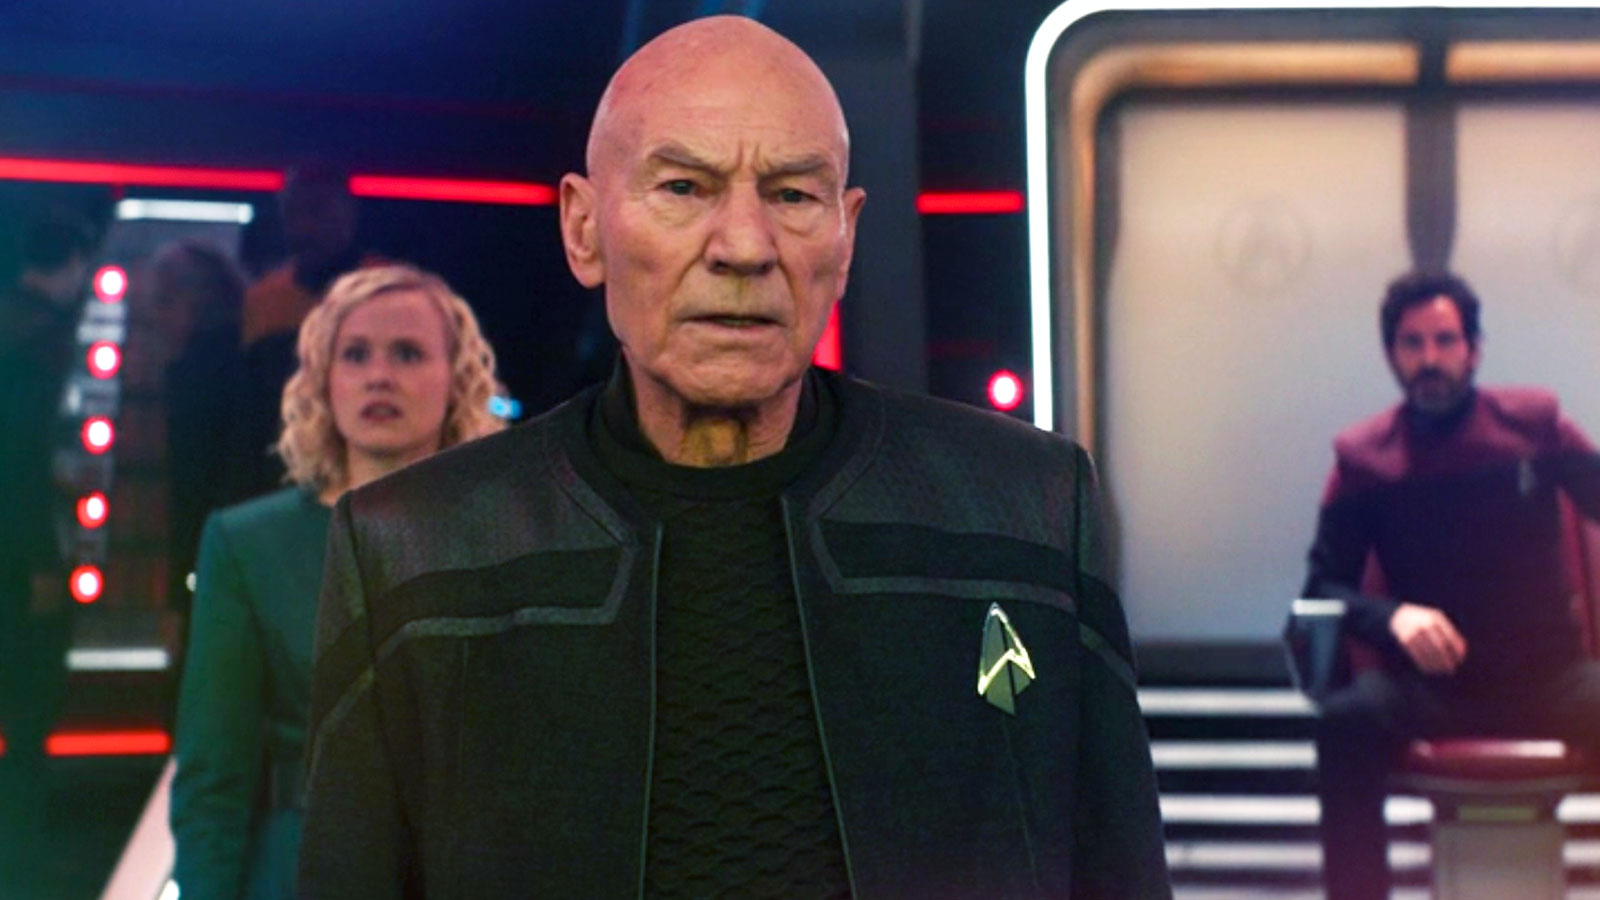 Star Trek: Picard “The Star Gazer” Review: Back With A Bang